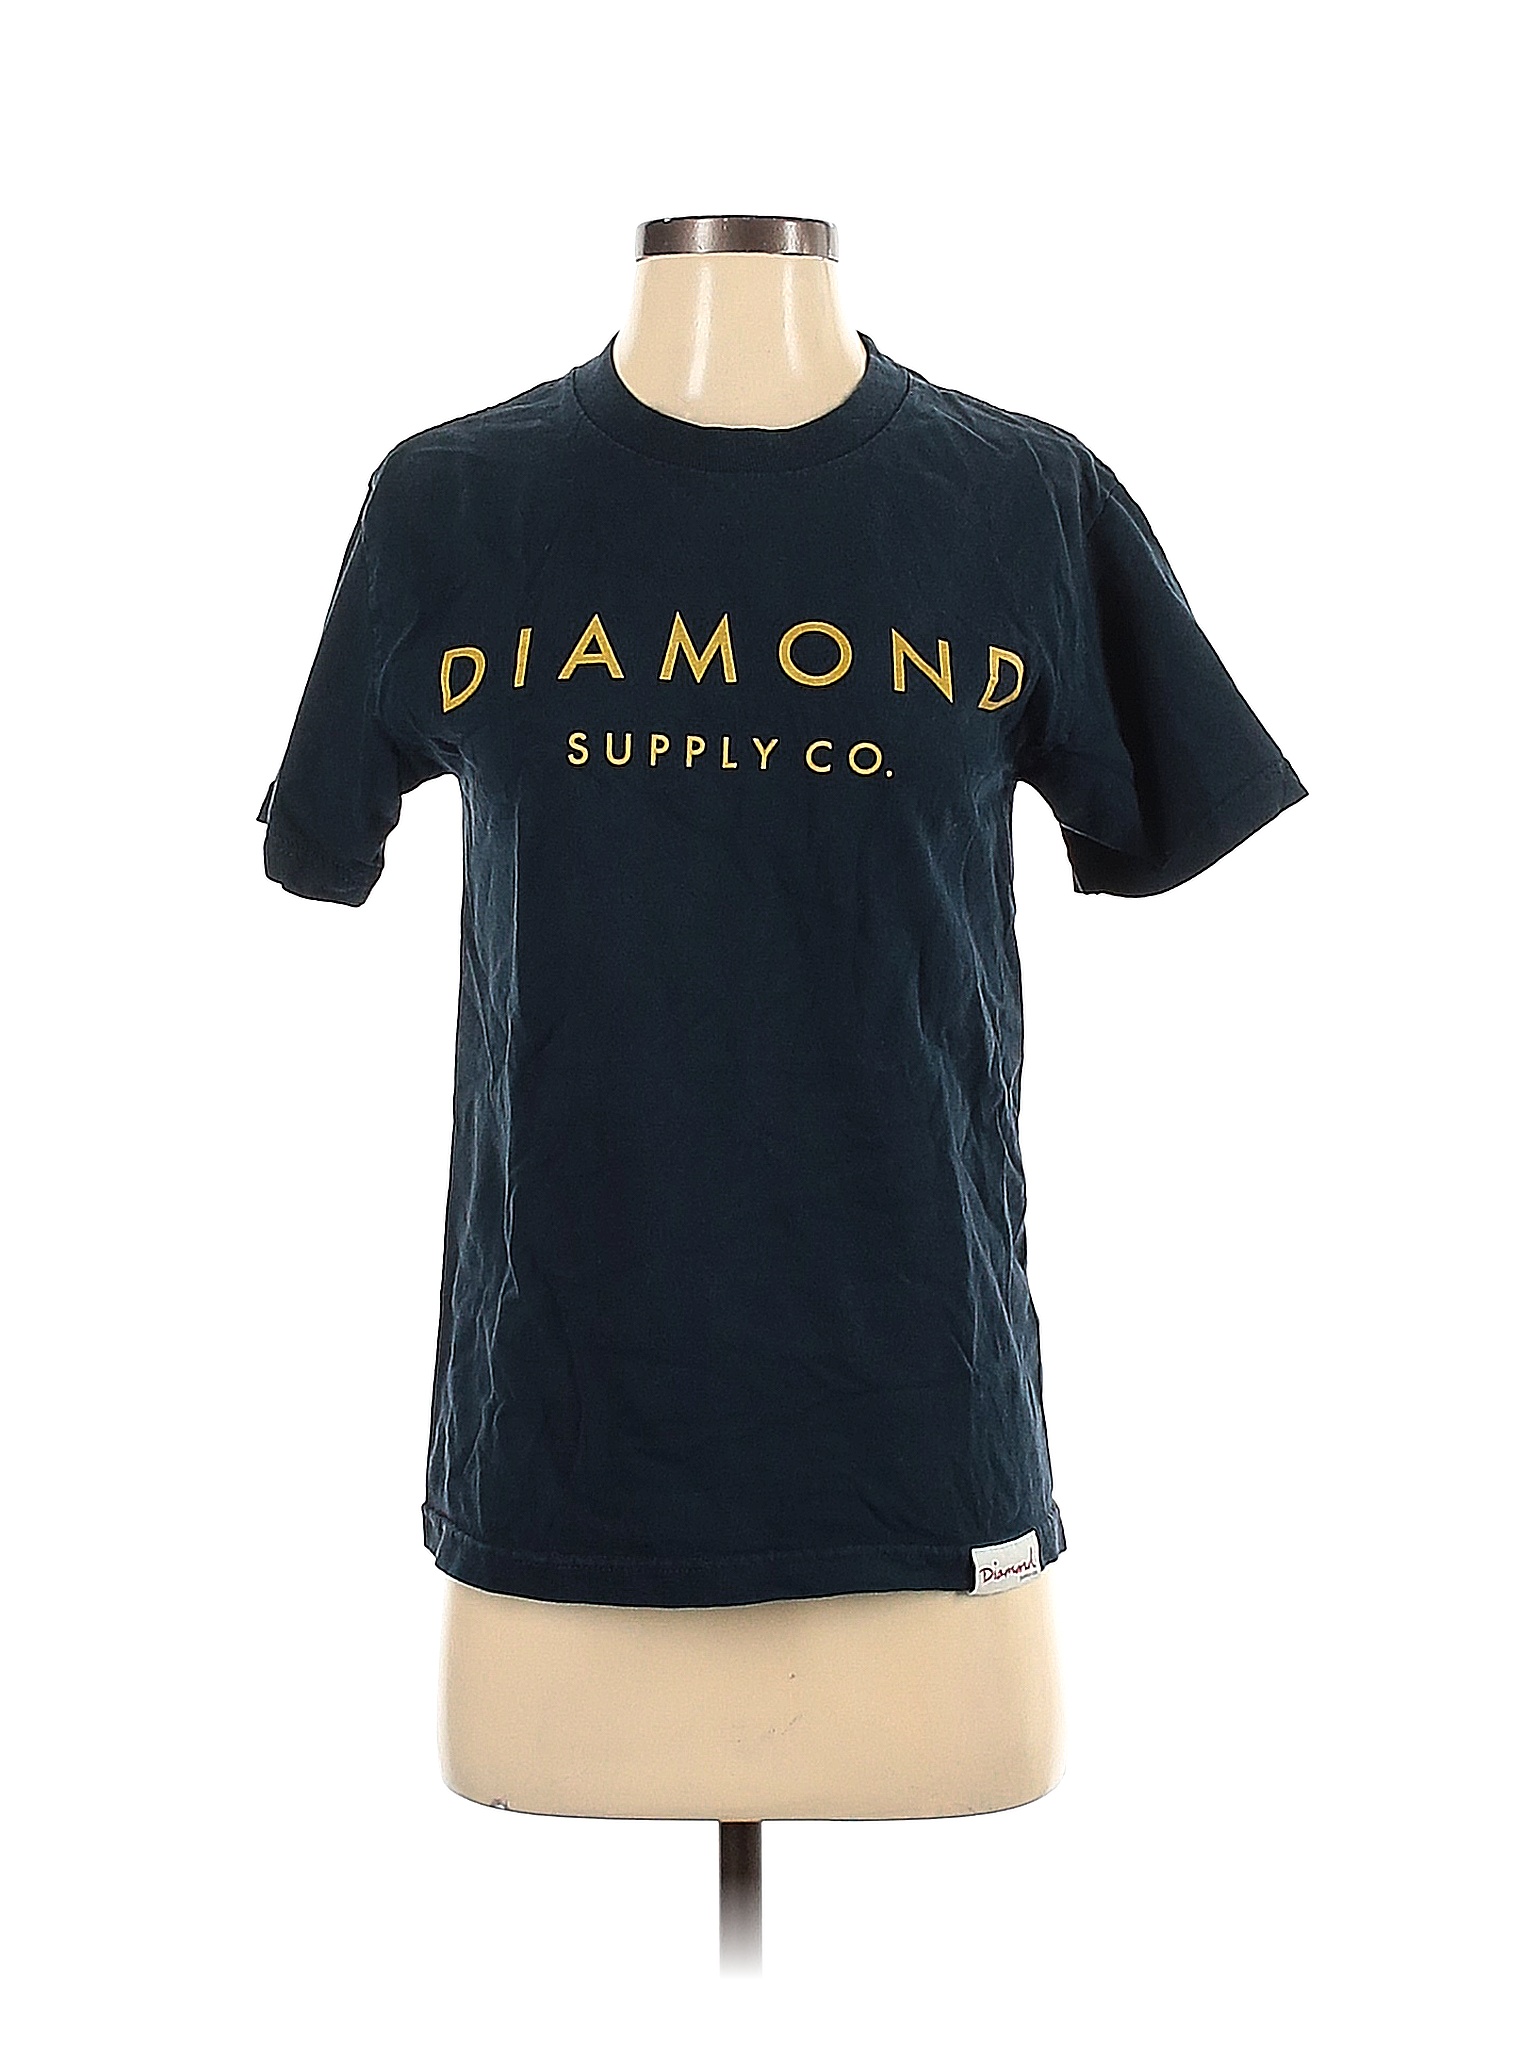 Diamond Supply Co Women's Clothing On Sale Up To 90% Off Retail 